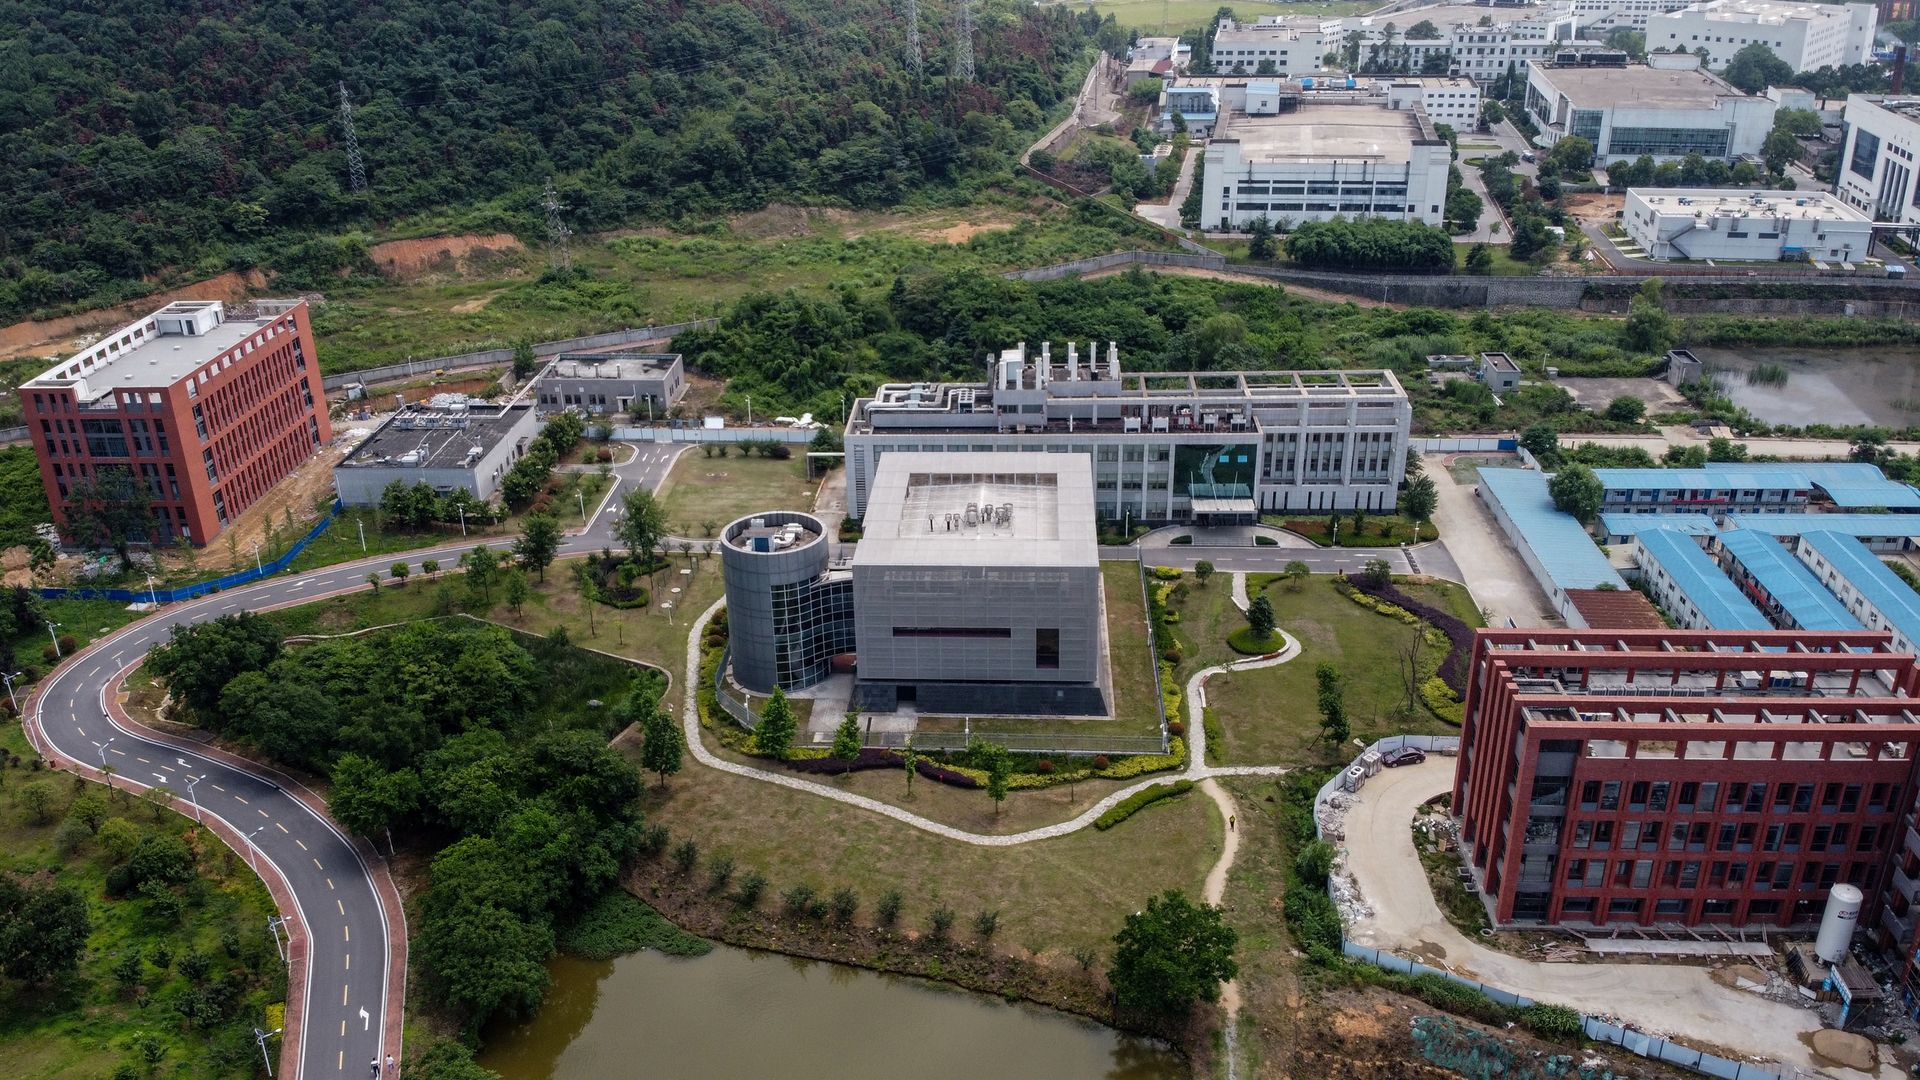 This aerial view shows the P4 laboratory (C) on the campus of the Wuhan Institute of Virology in Wuhan in China.